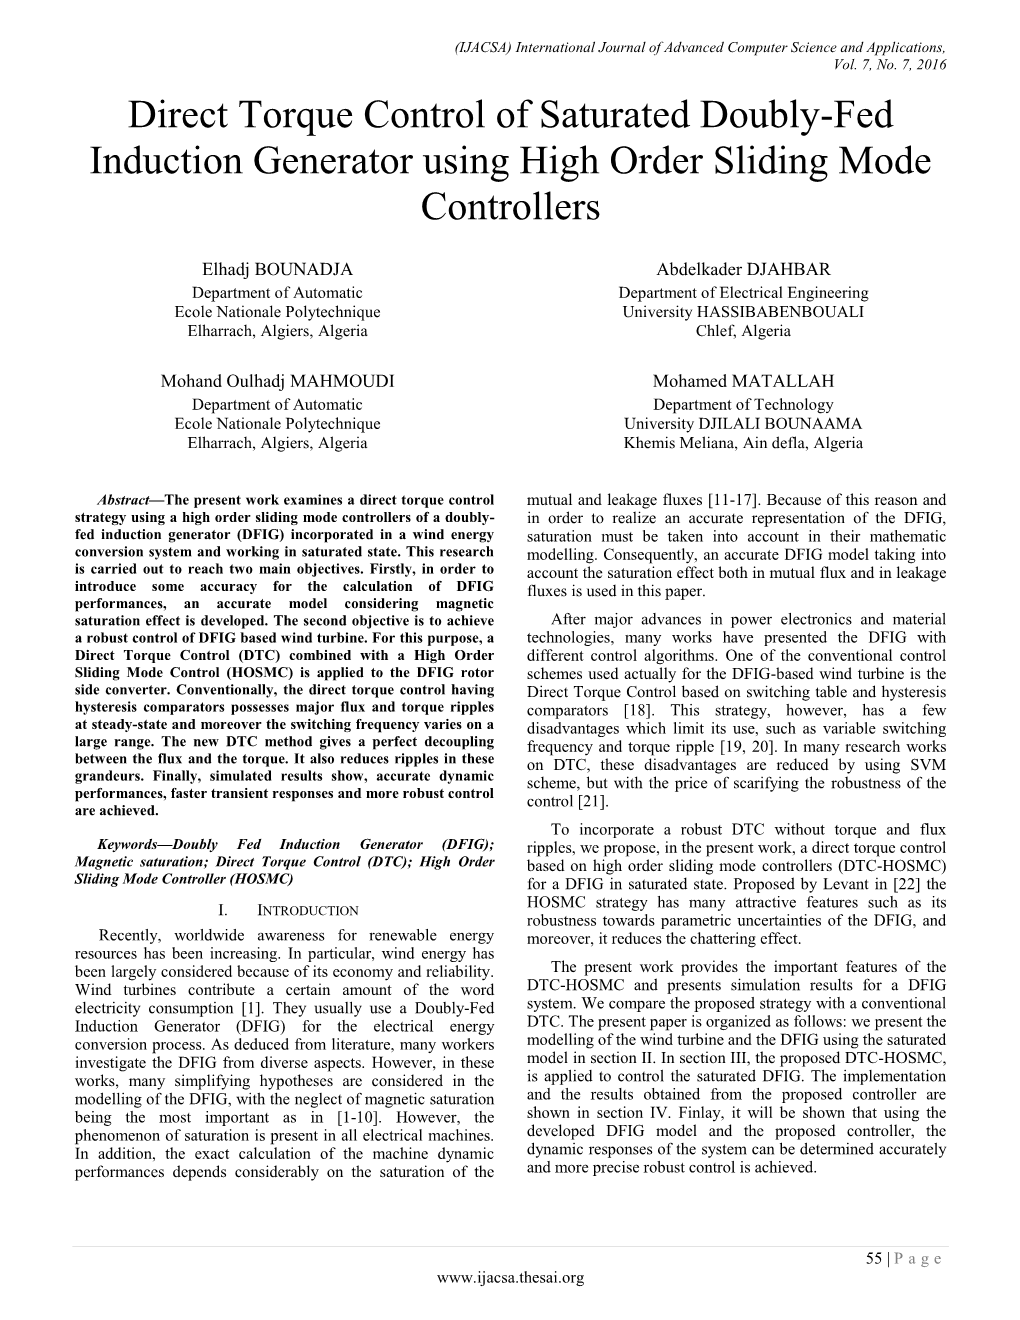 Direct Torque Control of Saturated Doubly-Fed Induction Generator Using High Order Sliding Mode Controllers